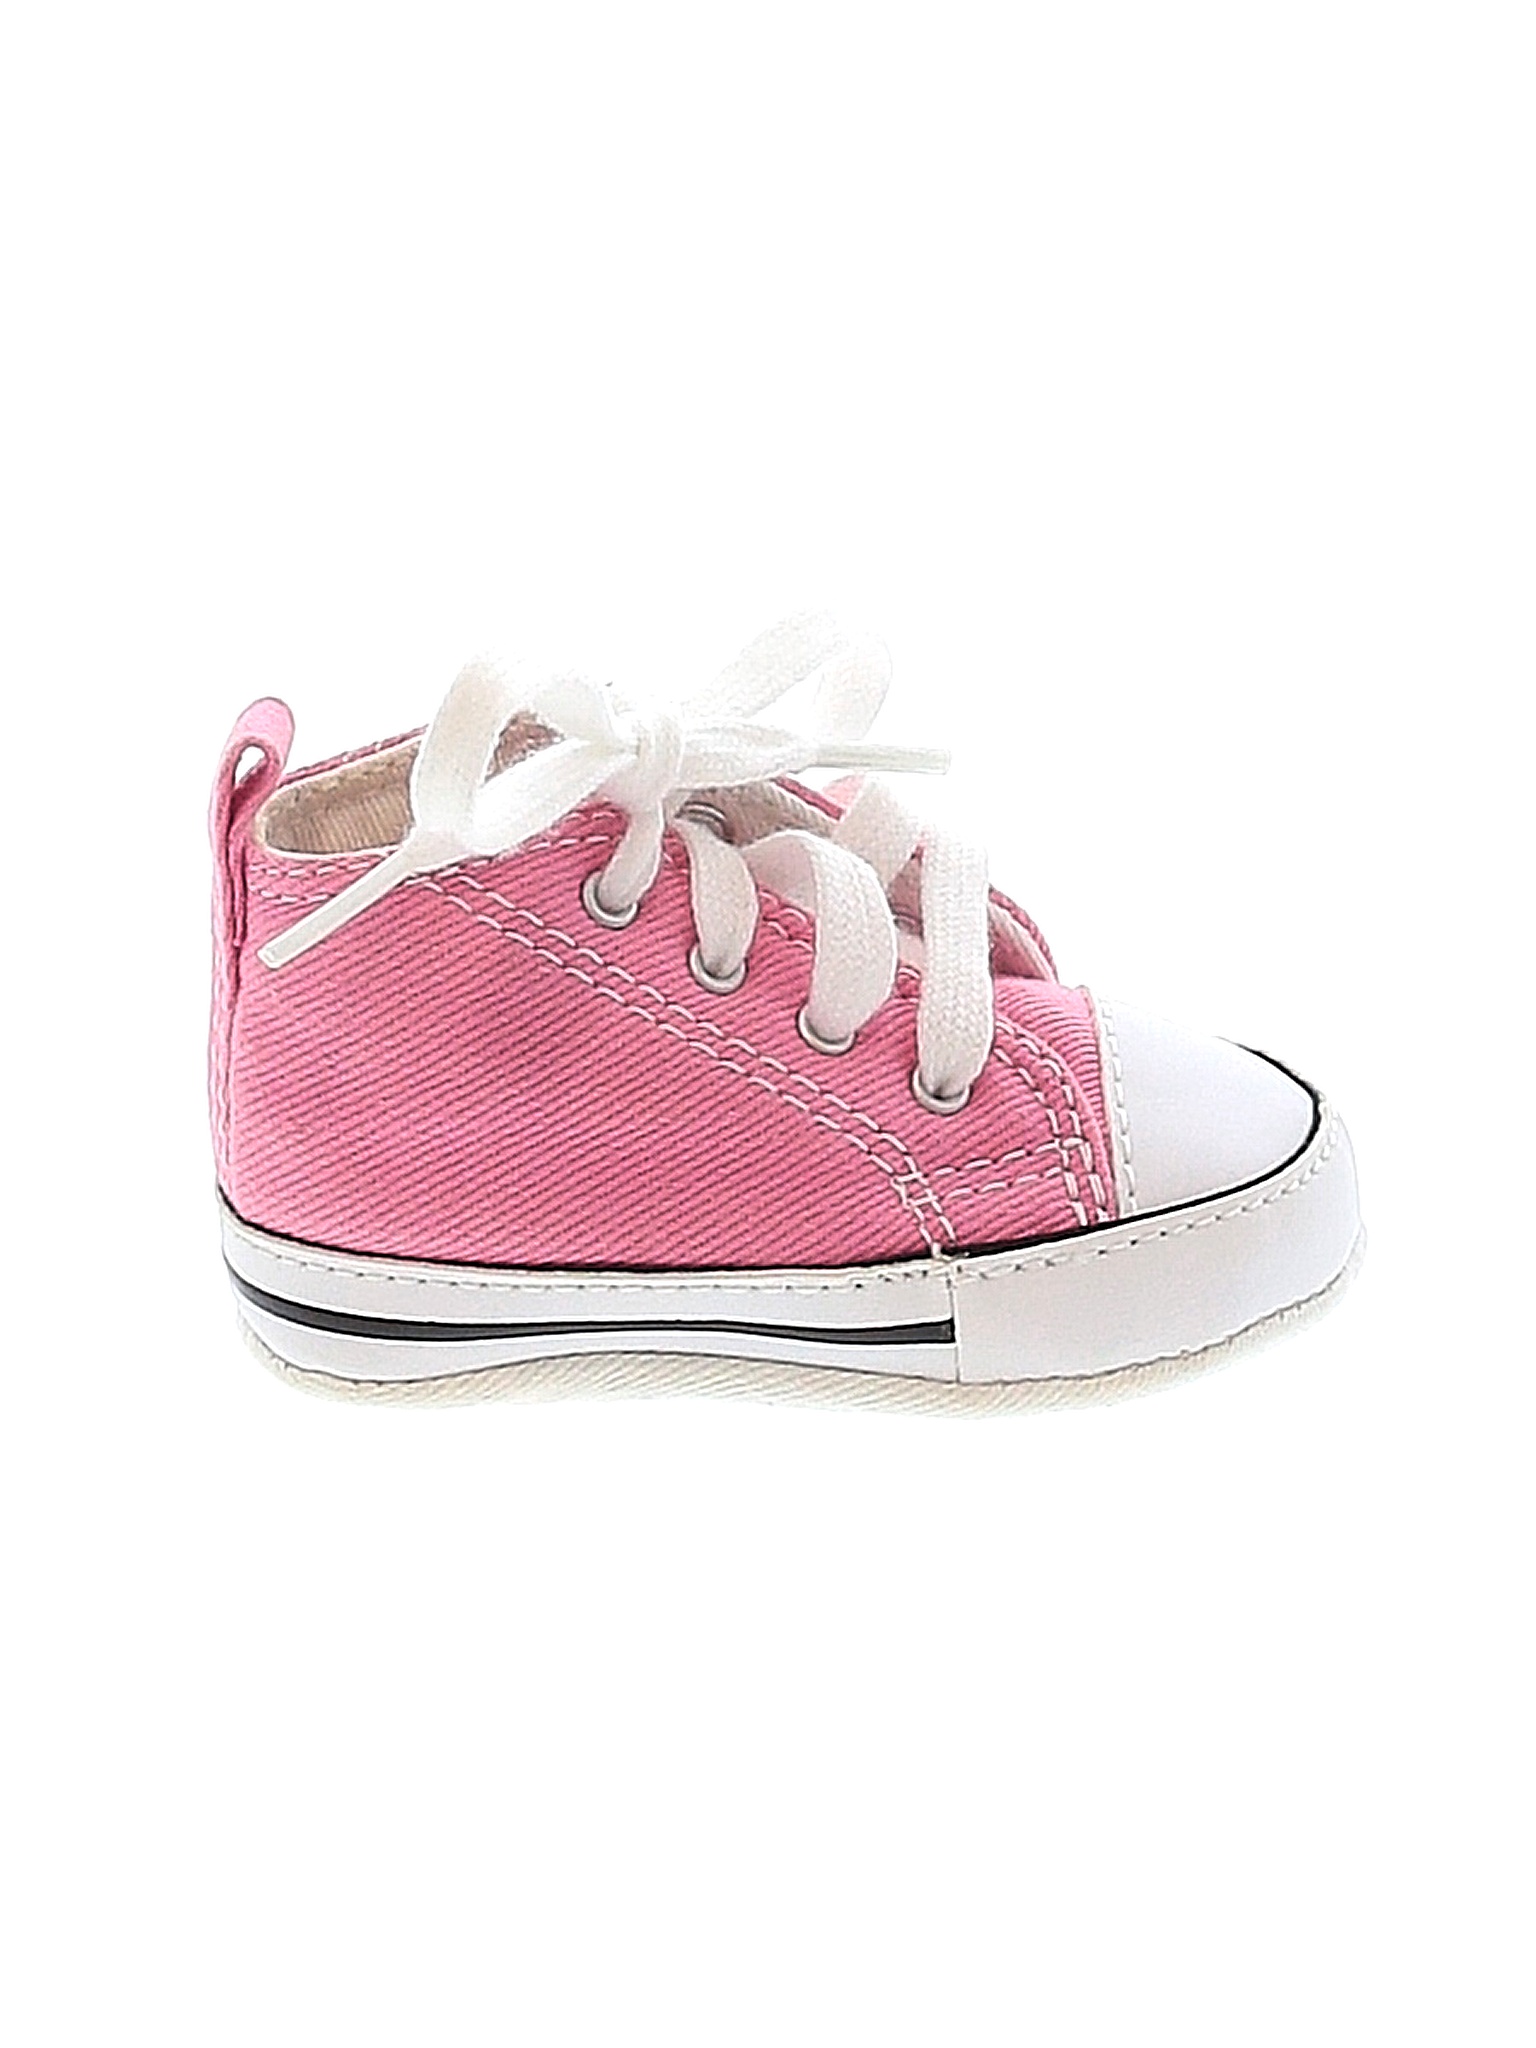 Converse Girls' Clothing On Sale Up To 90% Off Retail | thredUP